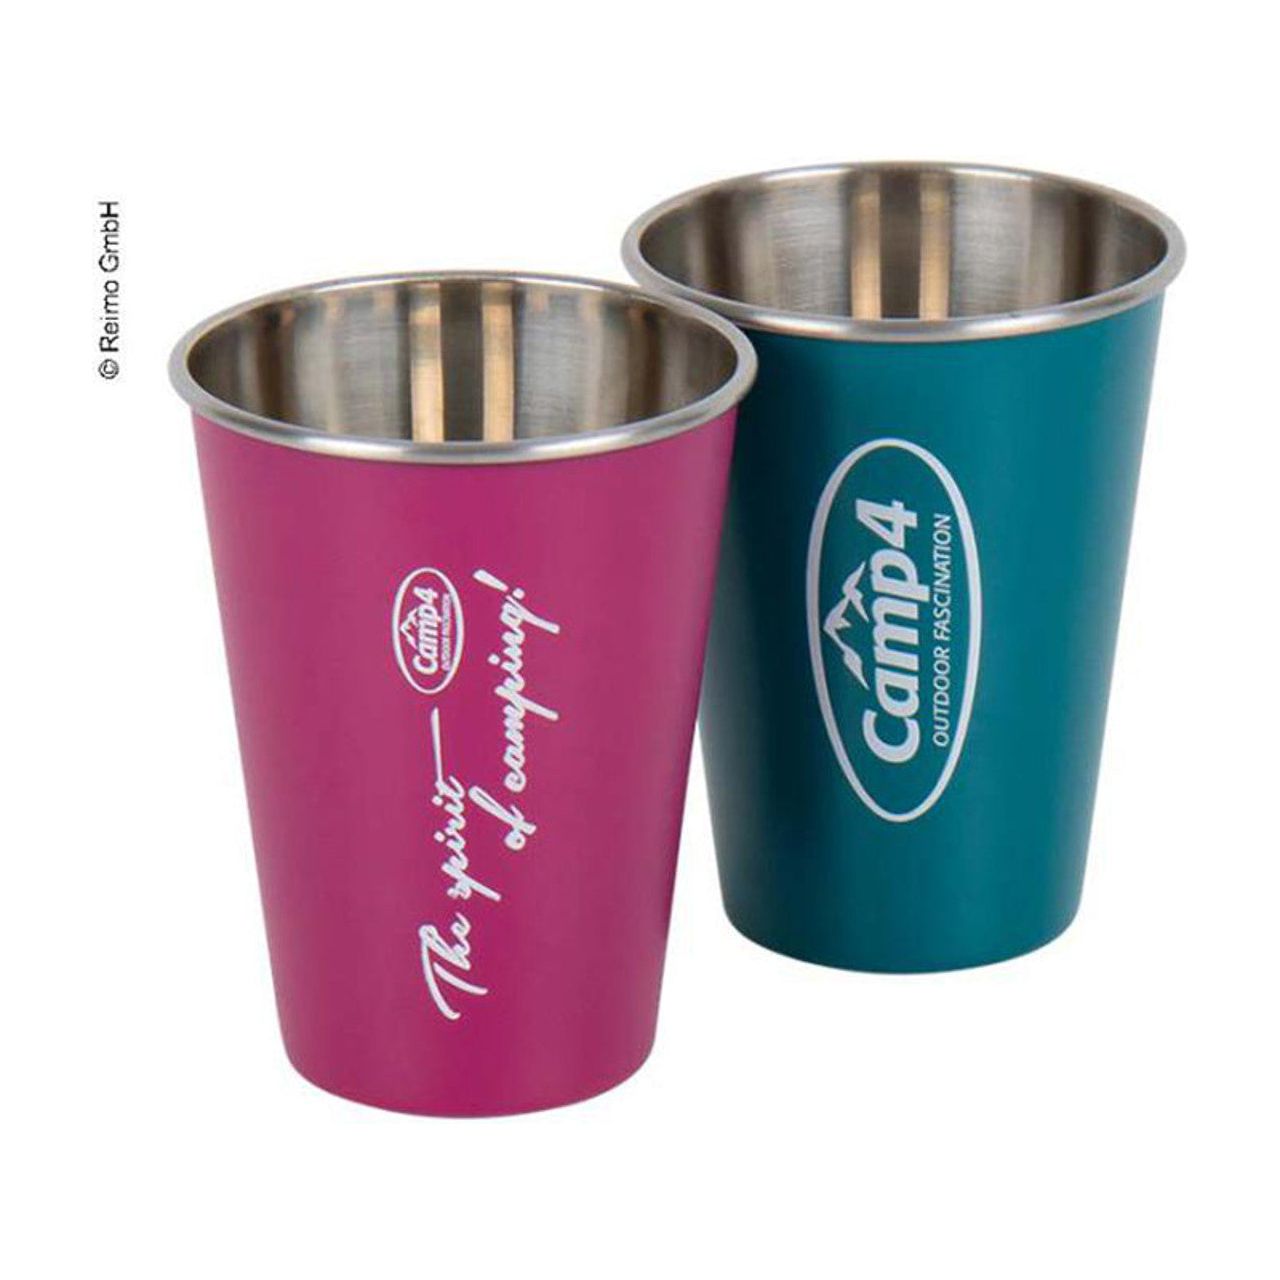 Stainless Steel Mug In Berry & Blue